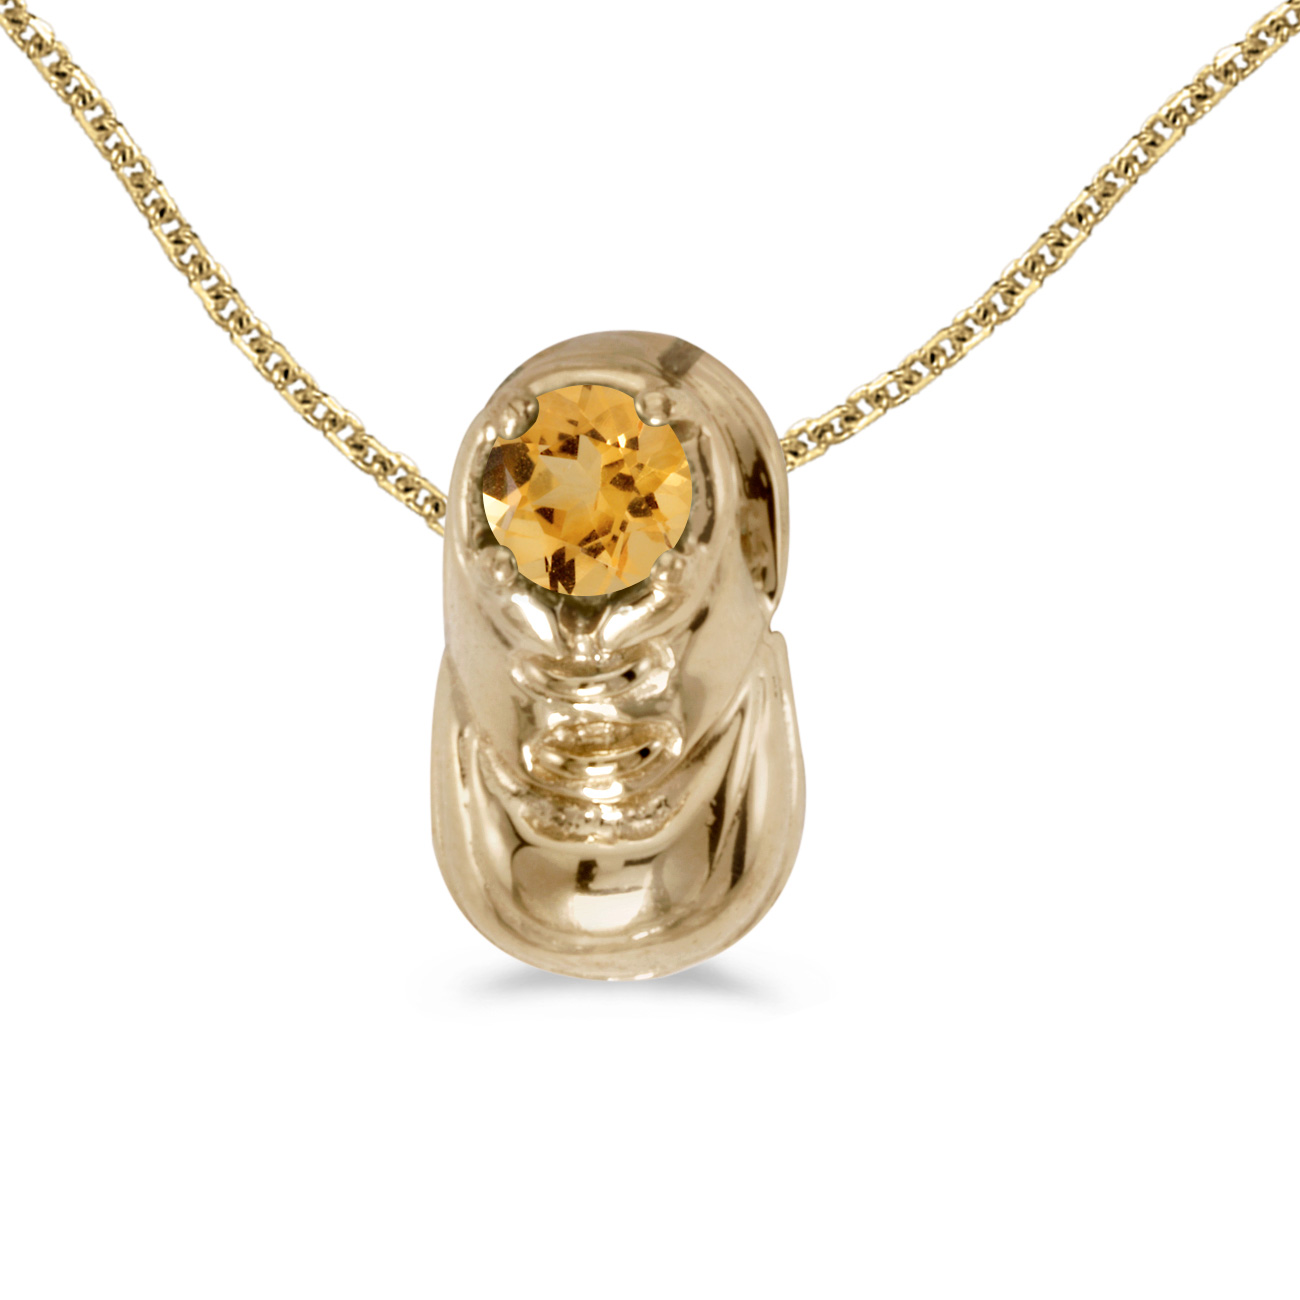 DIRECT-JEWELRY DON'T FORGET THE DASH 14k Yellow Gold Round Citrine Baby Bootie Pendant with 18" Chain